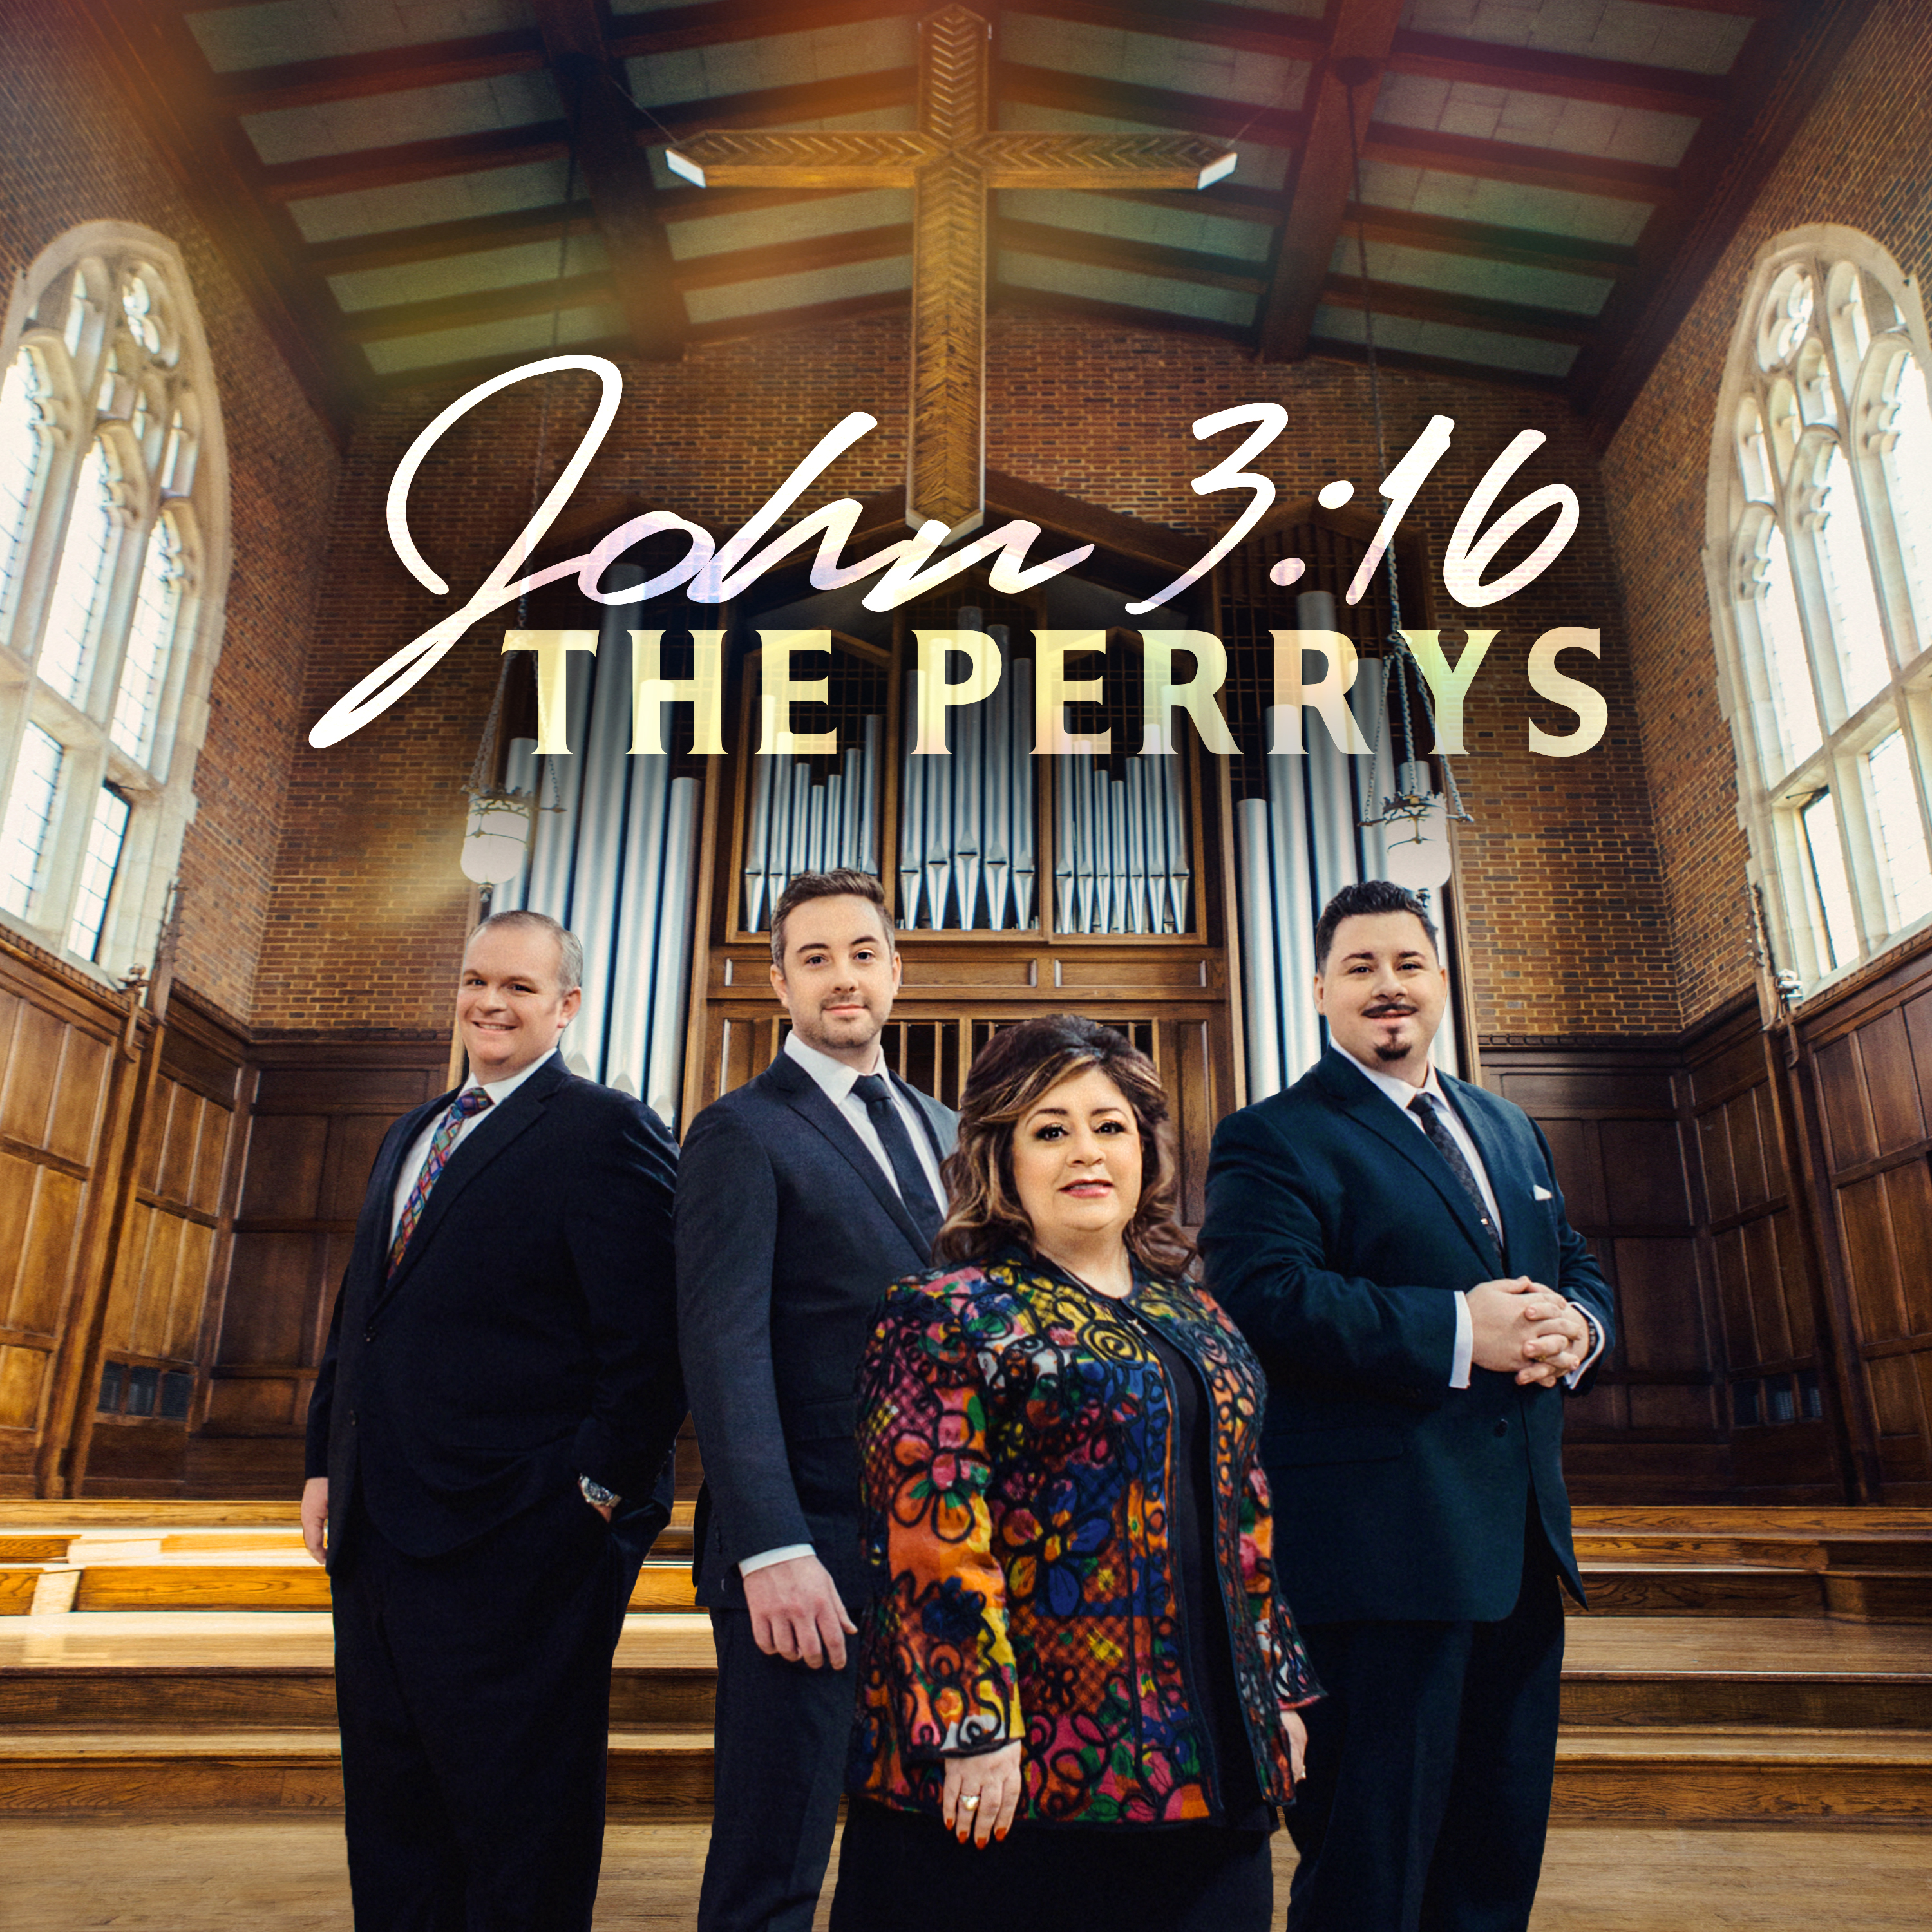 Art for Calvary's Touch by The Perrys